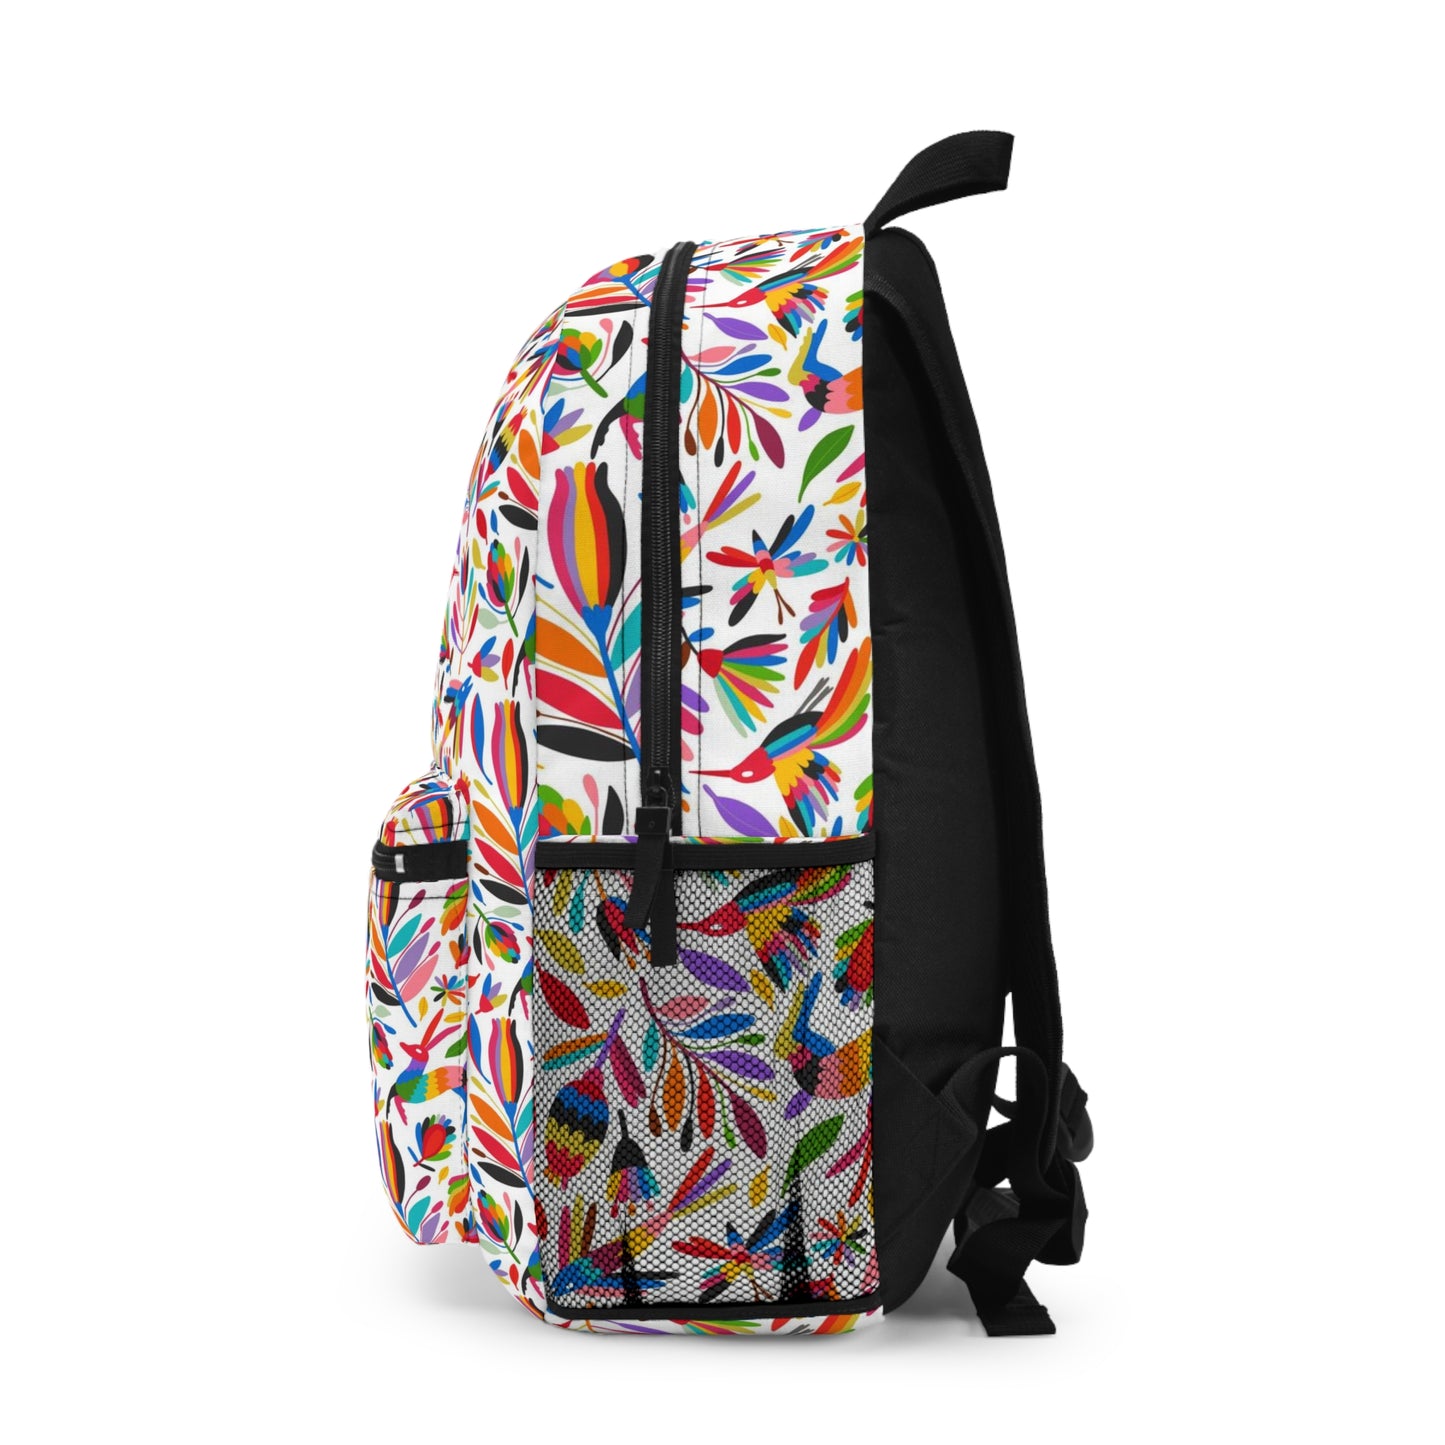 Otomi Backpack. Mexican backpack with colorful Otomi art. Casual, work or adventure bag with Mexican art.